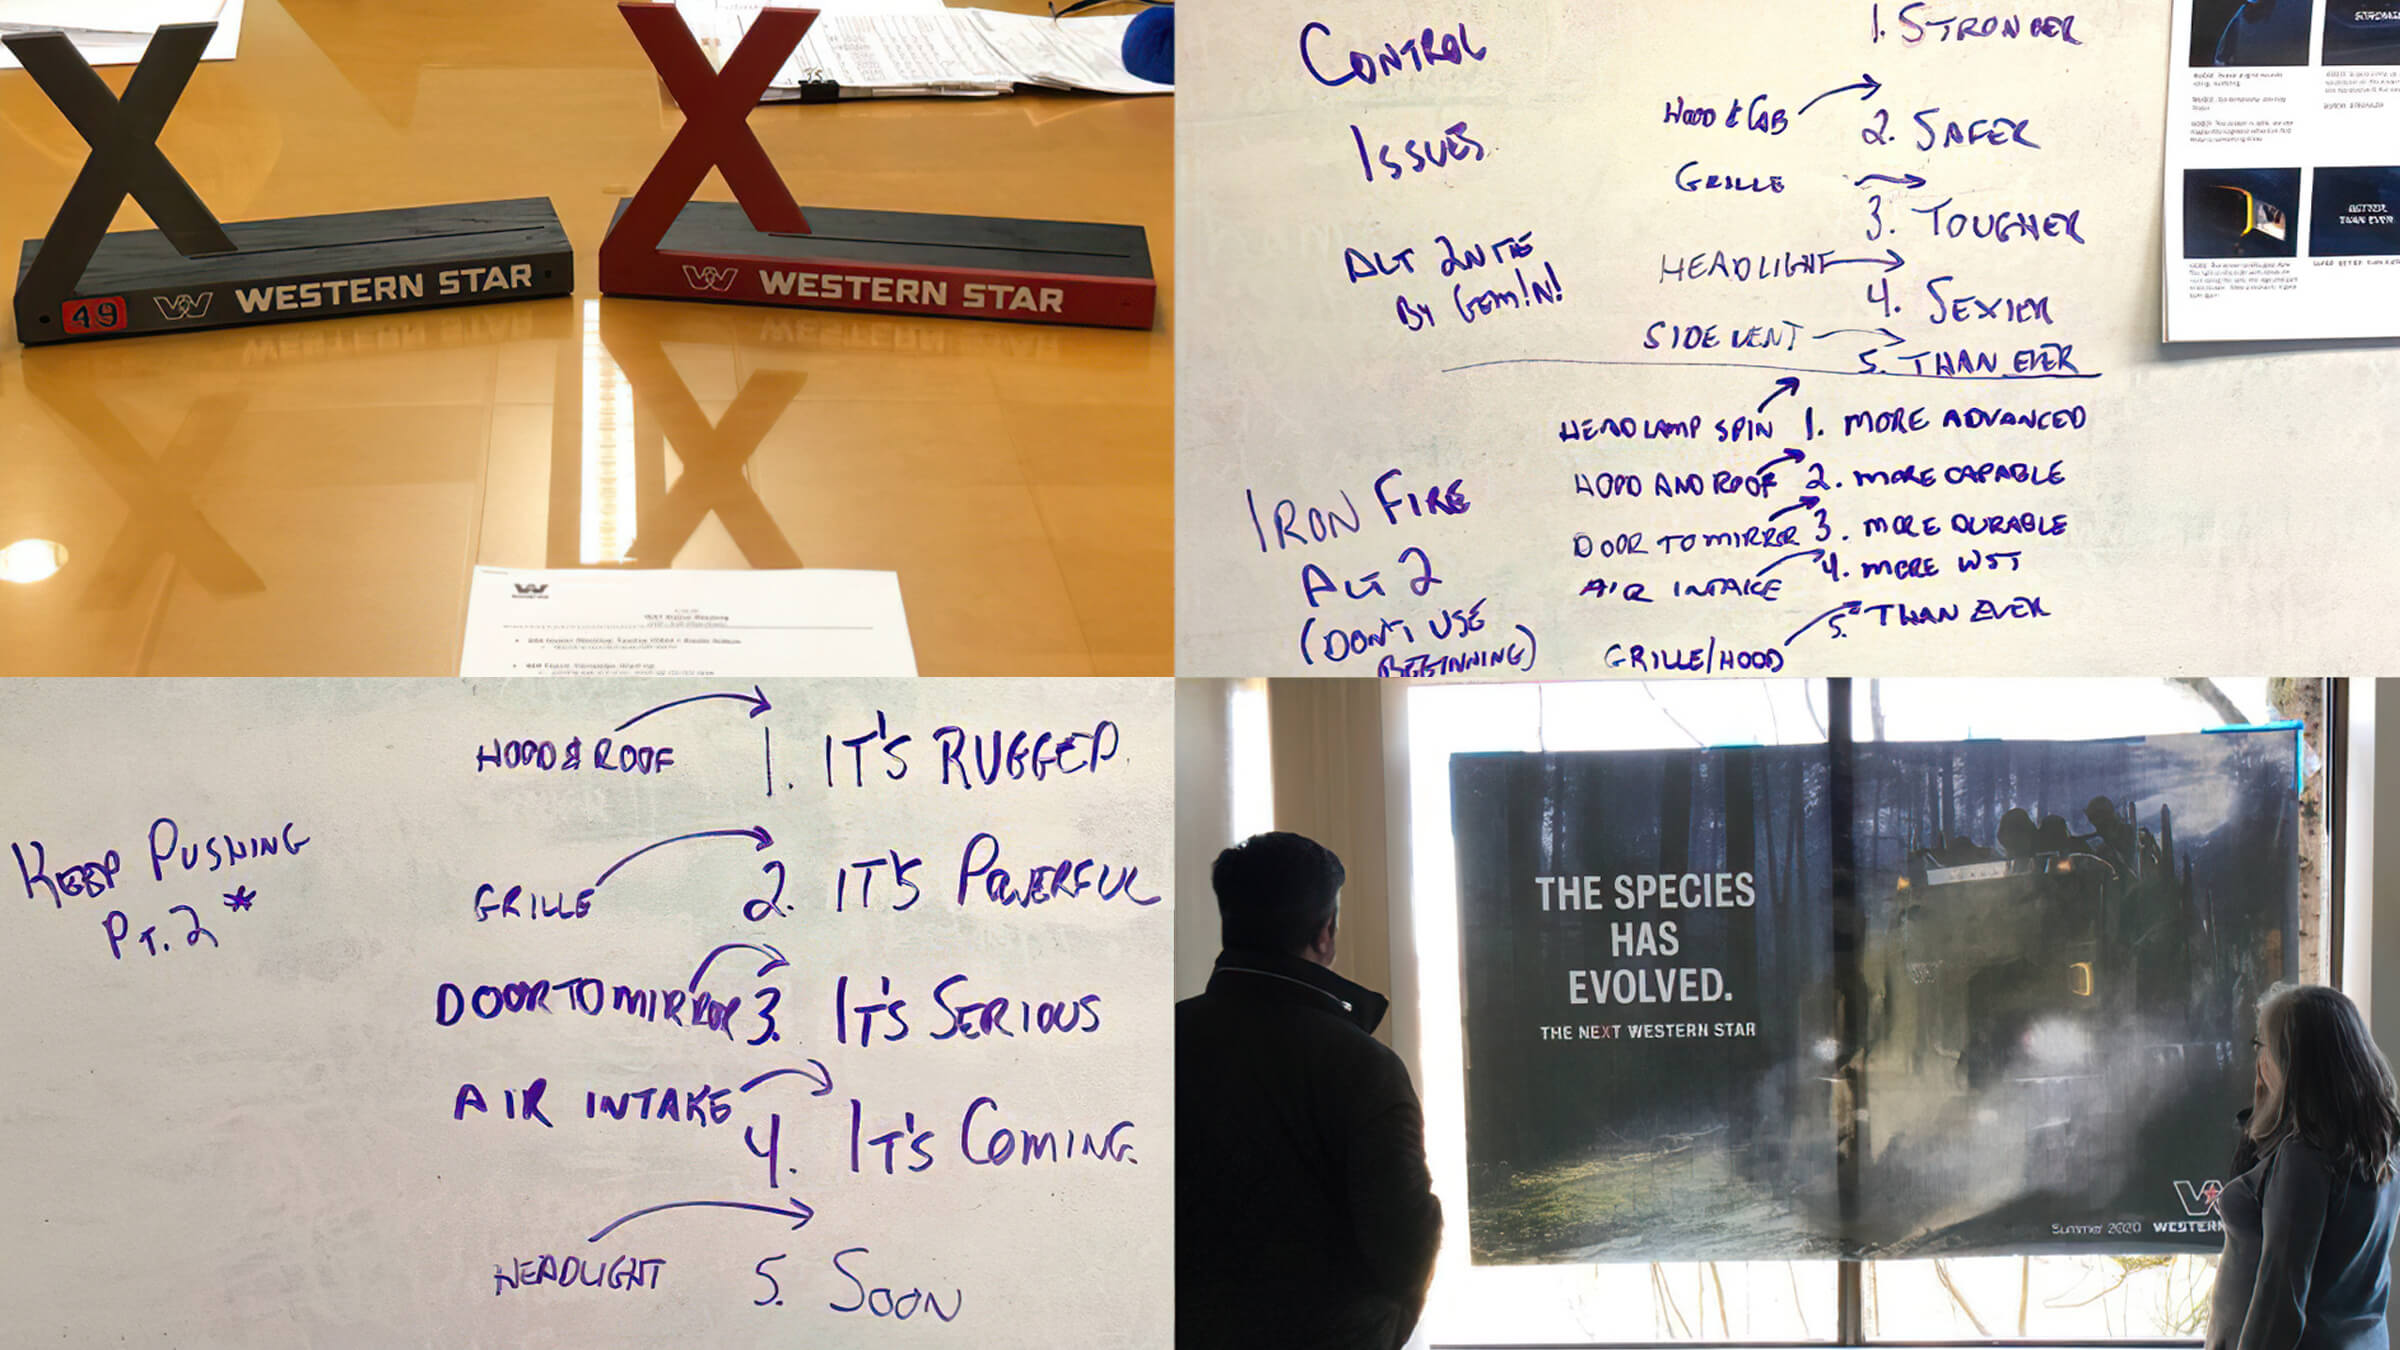 Western Star Trucks 49x launch behind-the-scenes whiteboard concepting